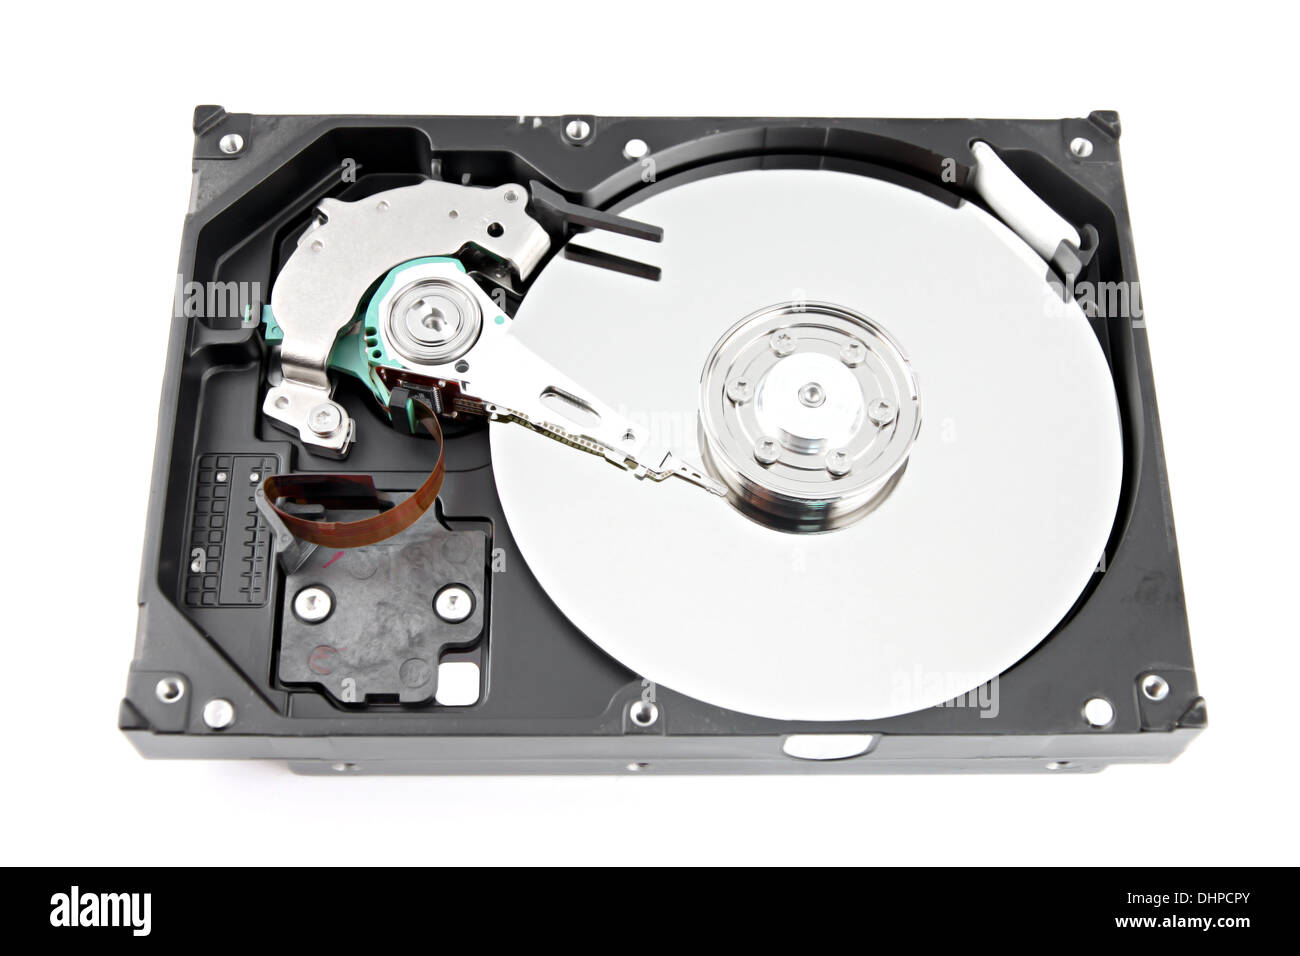 The Hard drive Open the top cover off on white background. Stock Photo